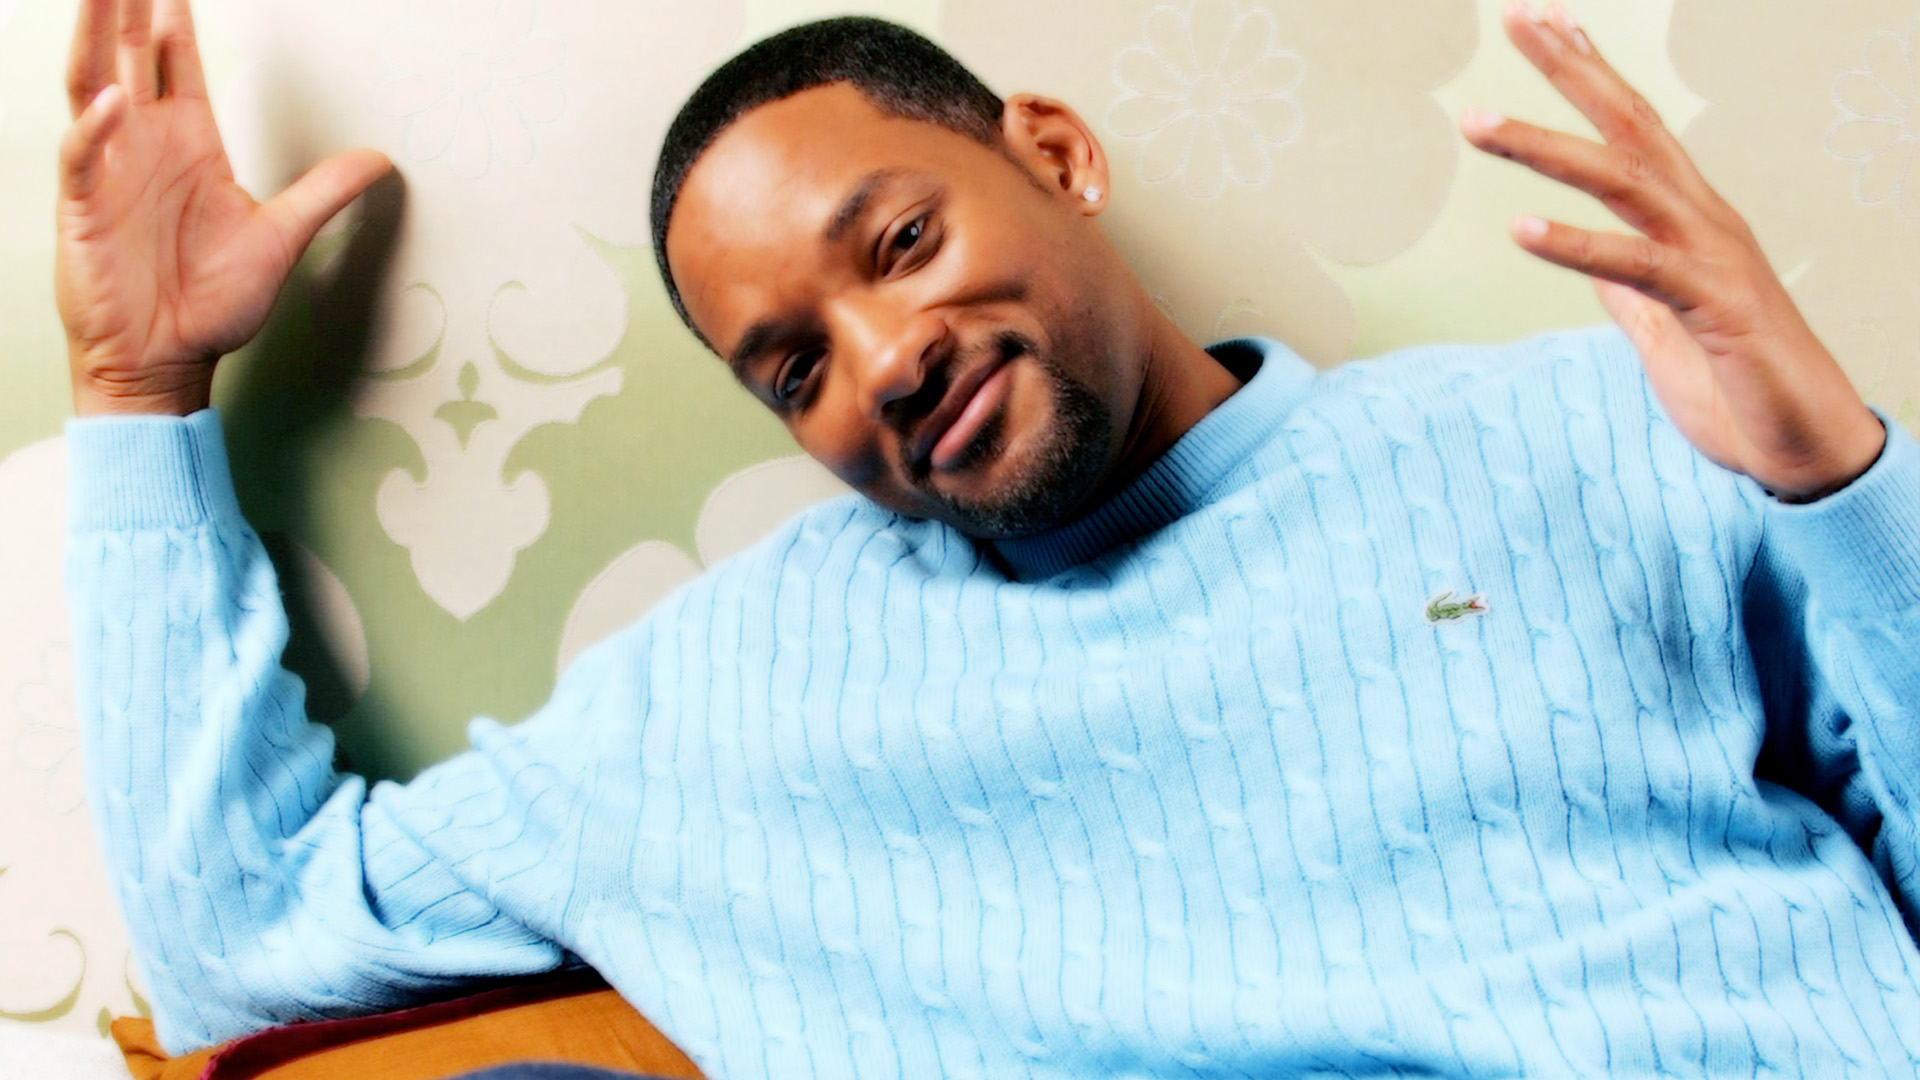 Girls Aint Nothing But Trouble av Will Smith